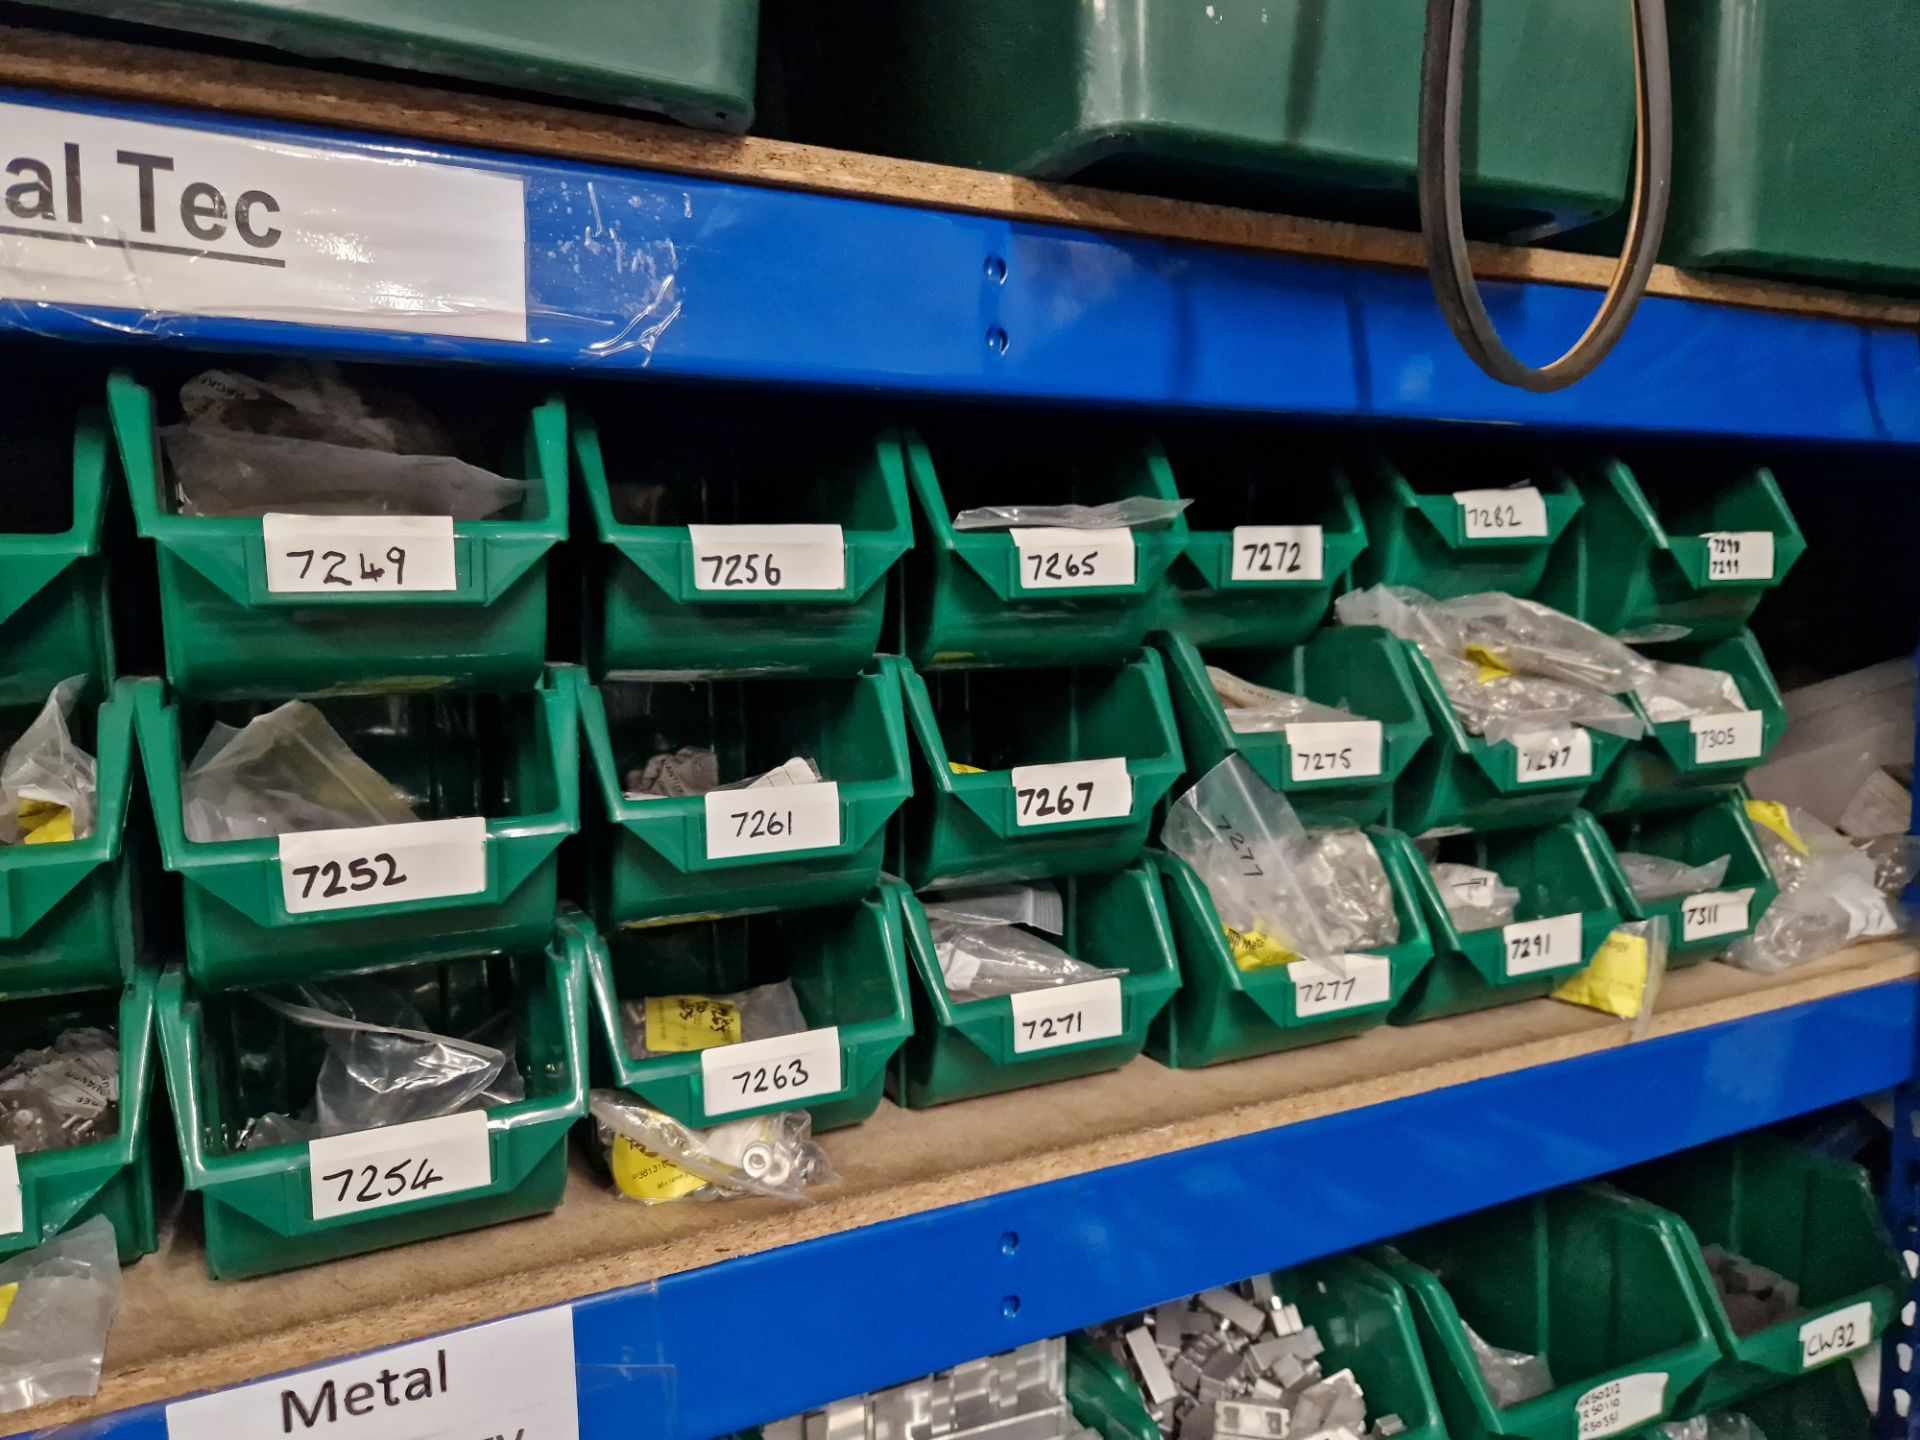 Contents to One Bay of Shelving, including Rubber Gaskets, Aluminium Profile, End Caps, Screws, - Image 5 of 6